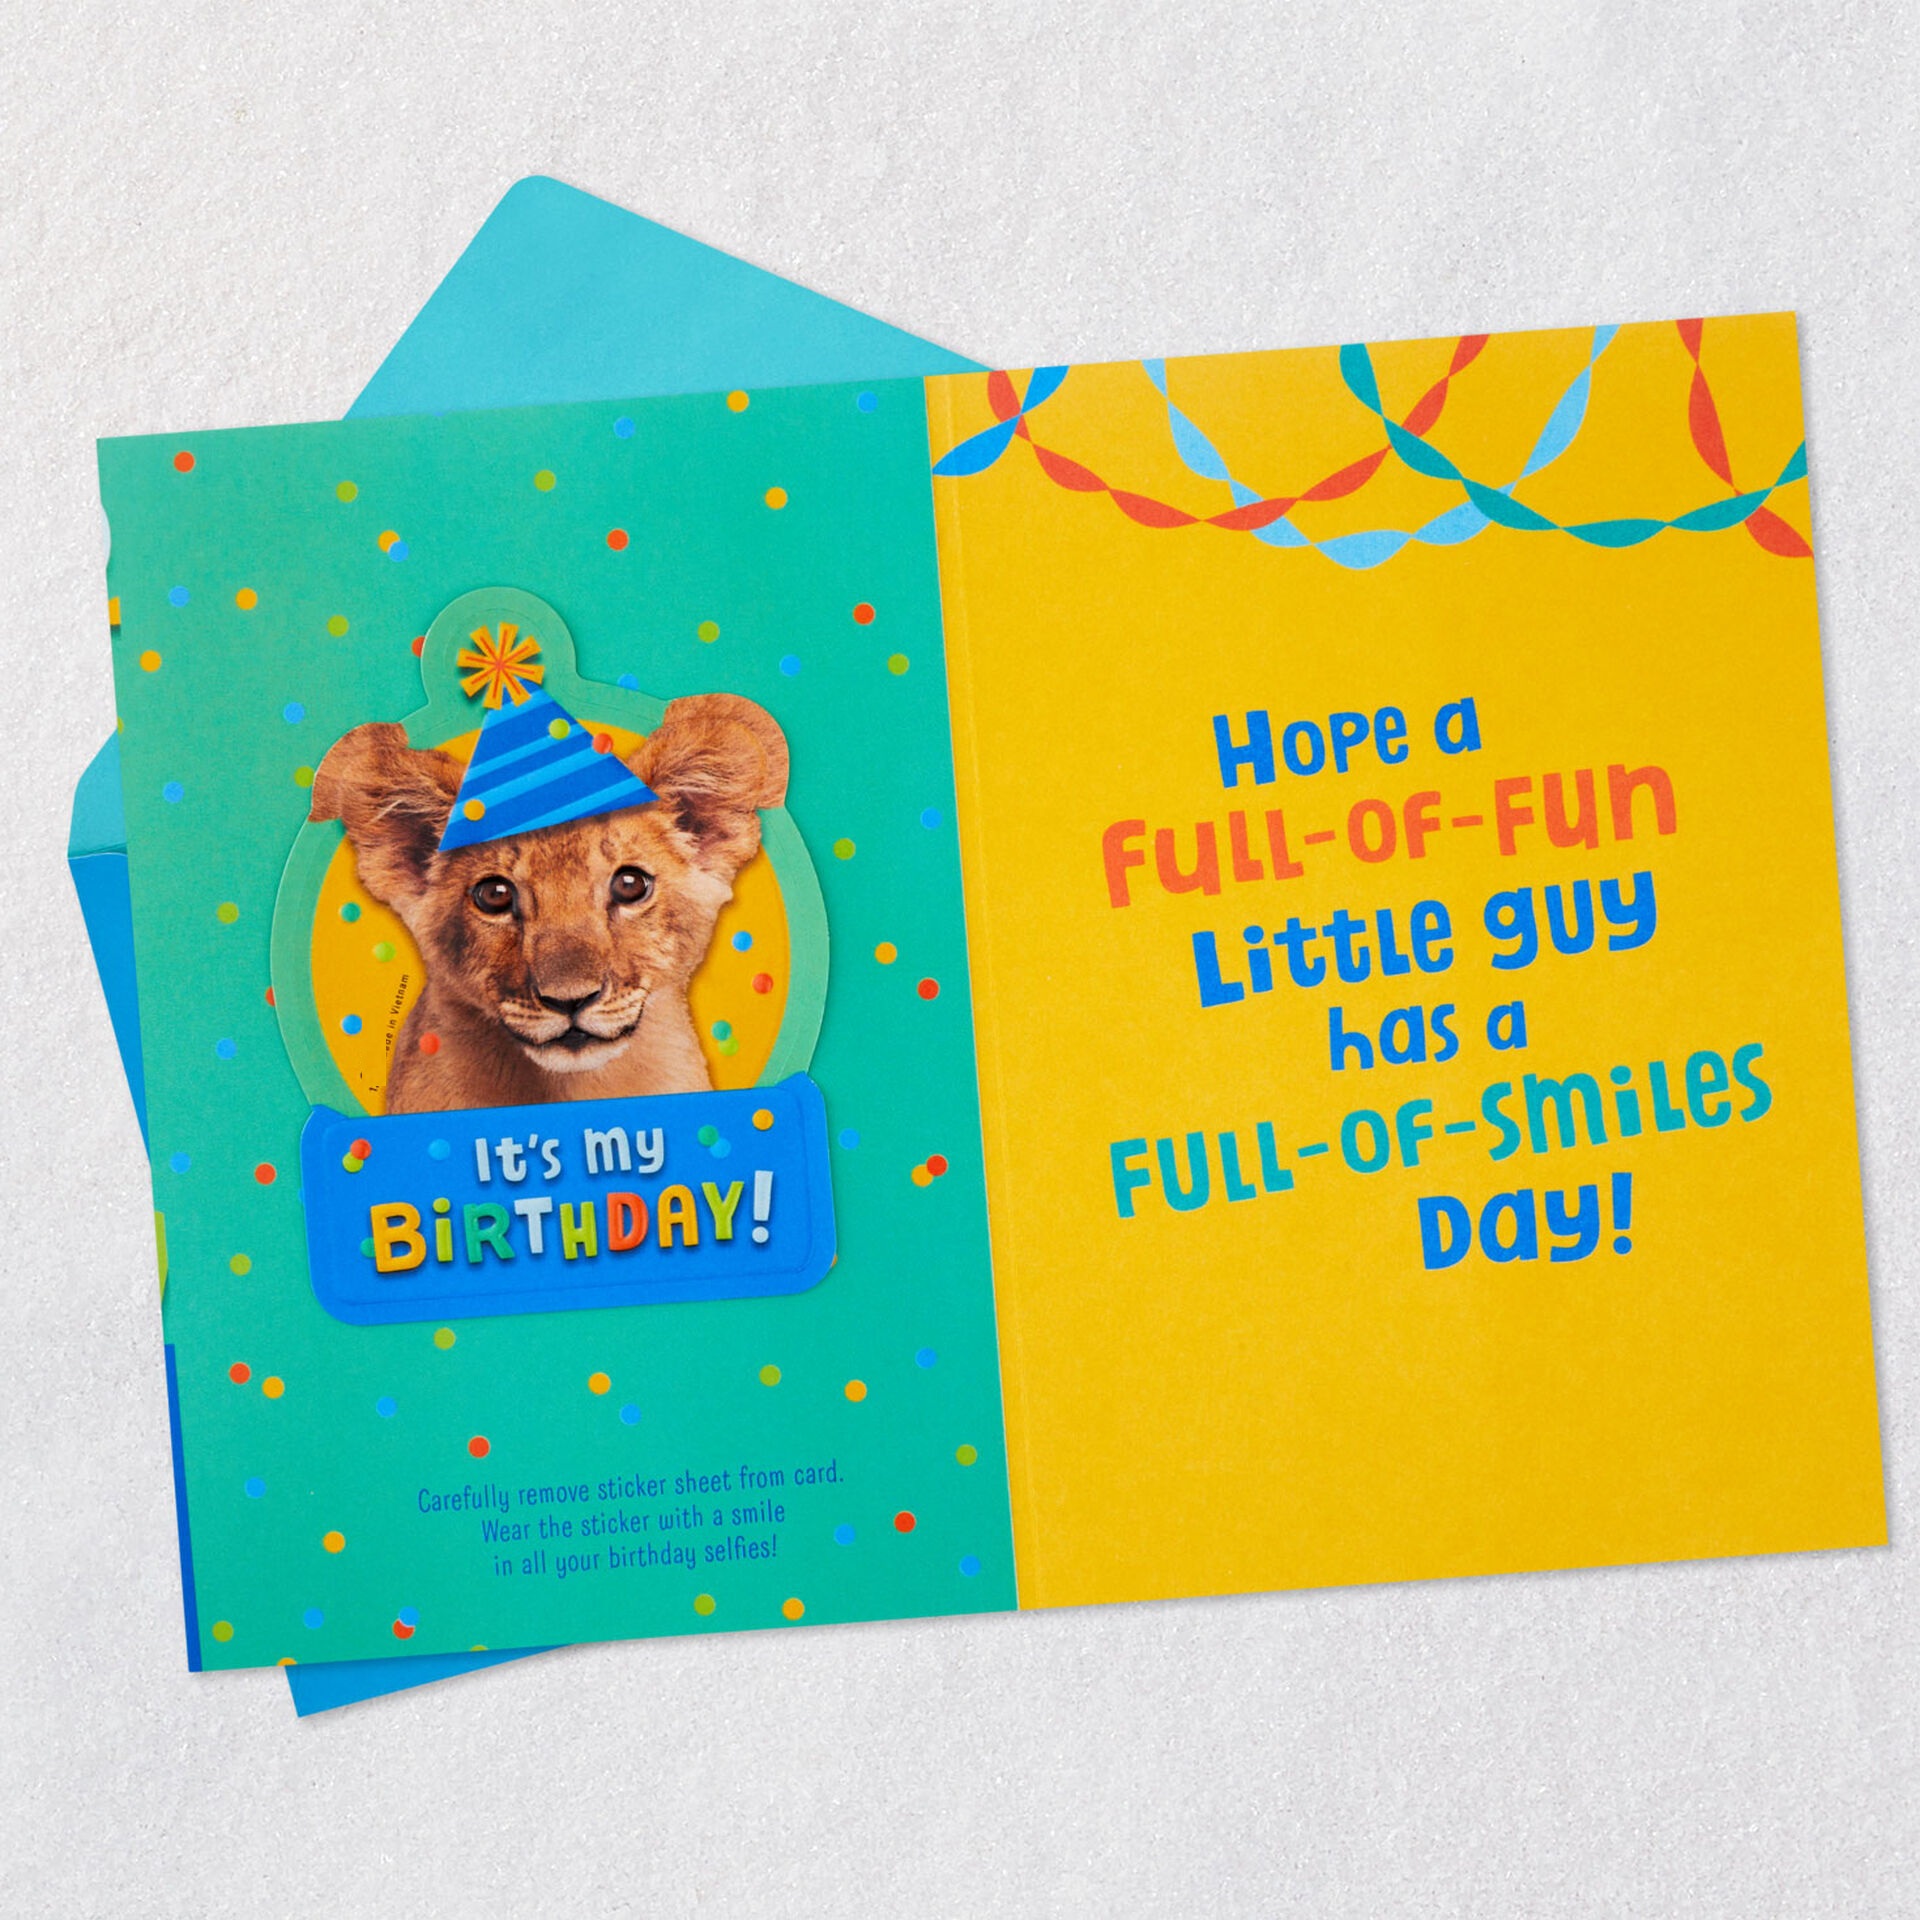 Cute-Lion-Kids-Birthday-Card-for-Him-With-Sticker_399HKB5922_03